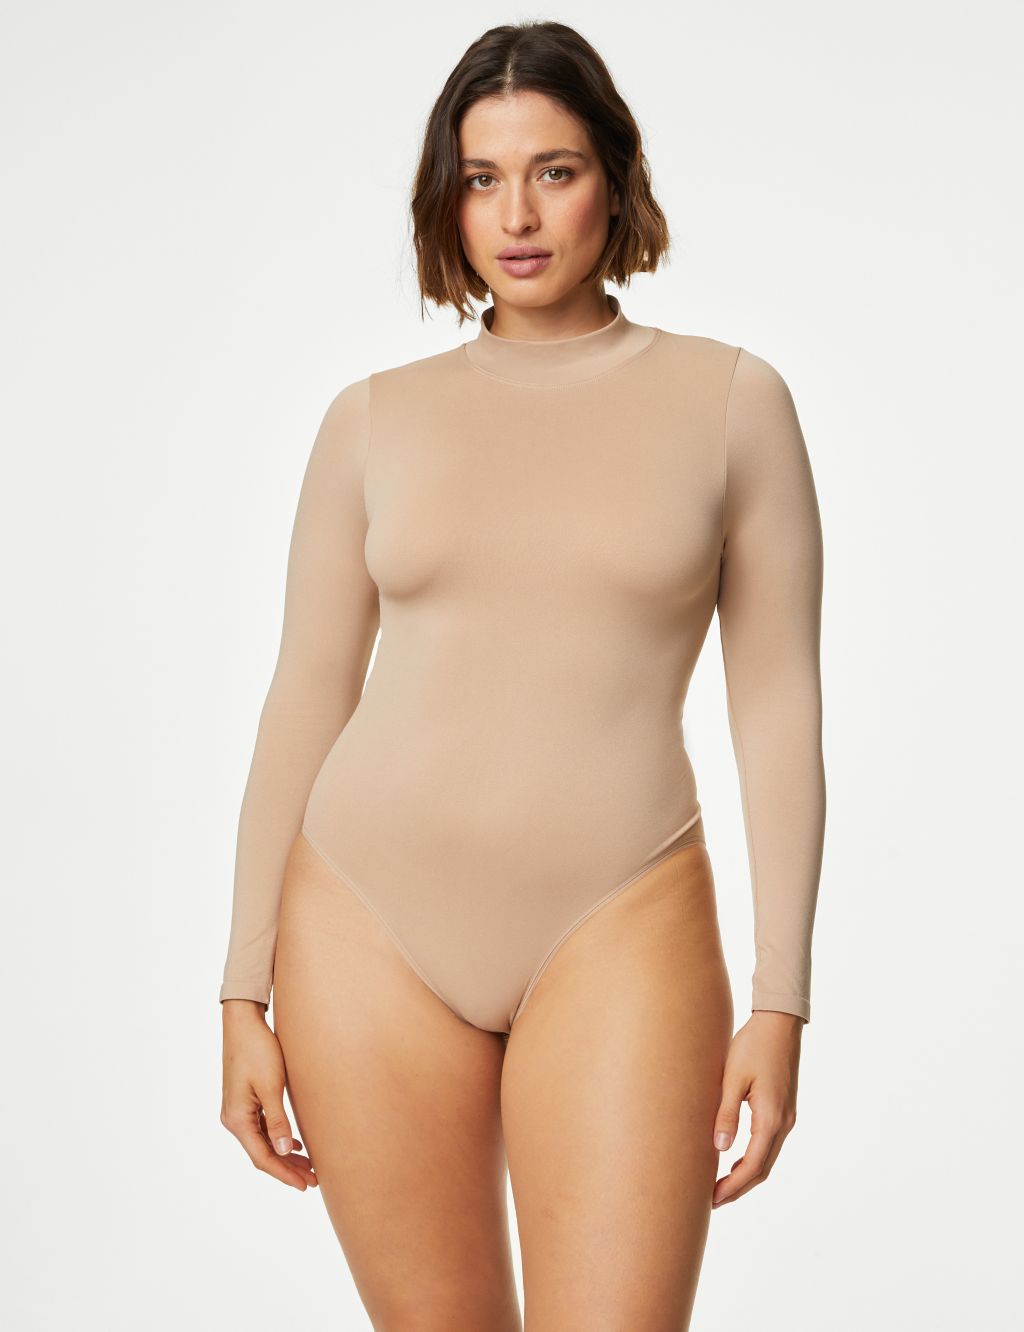 Smoothing Cool Comfort™ Shaping Body image 1